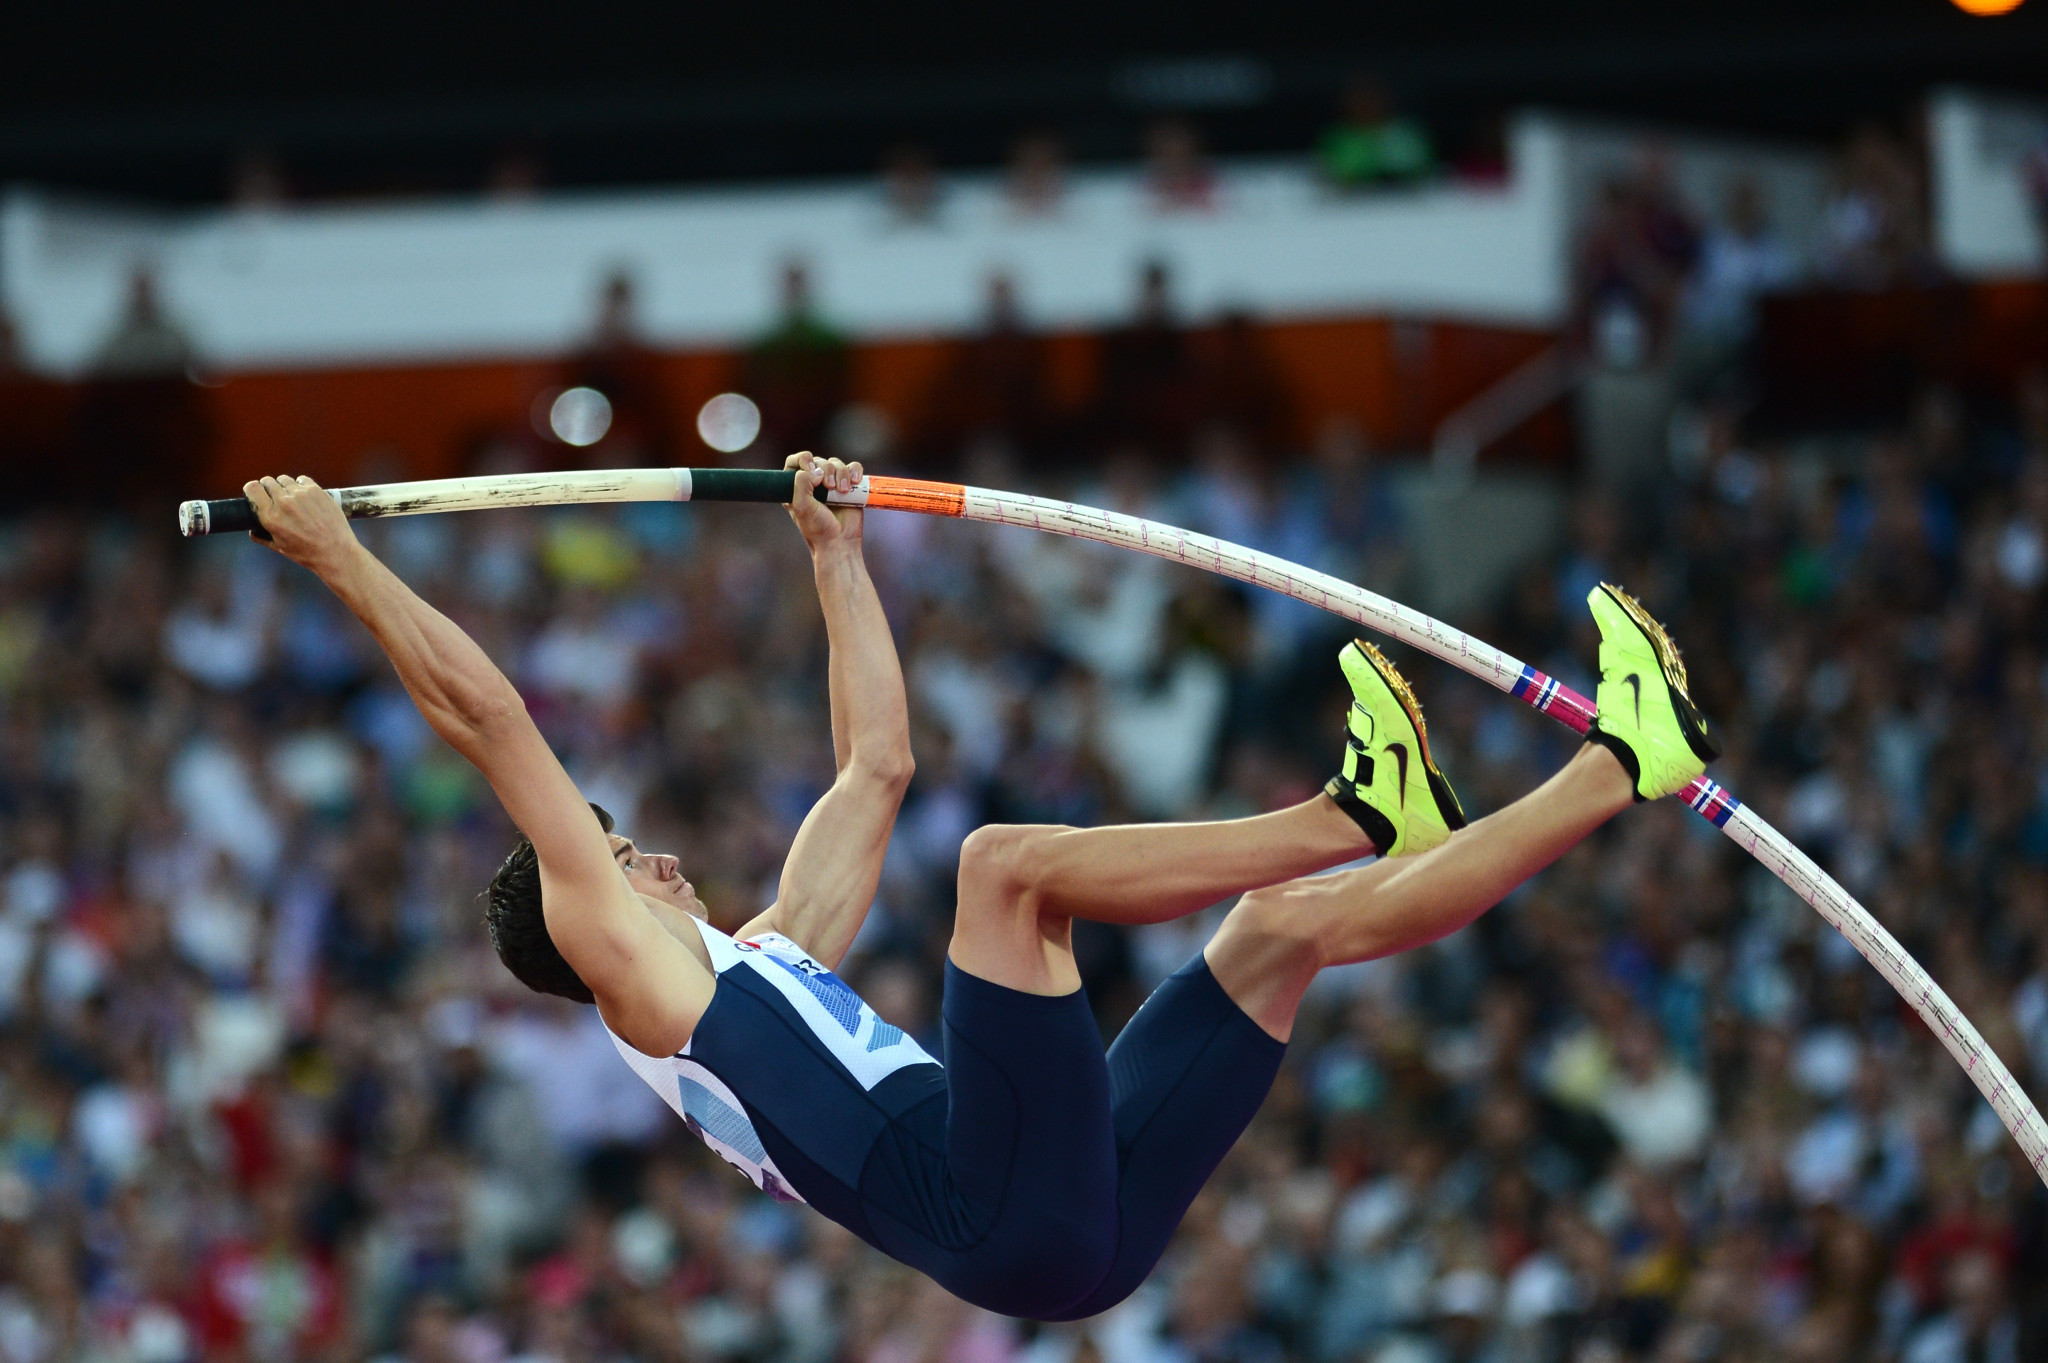 Steve Lewis also finished in an impressive fourth place at the London 2012 Olympic Games ©Getty Images